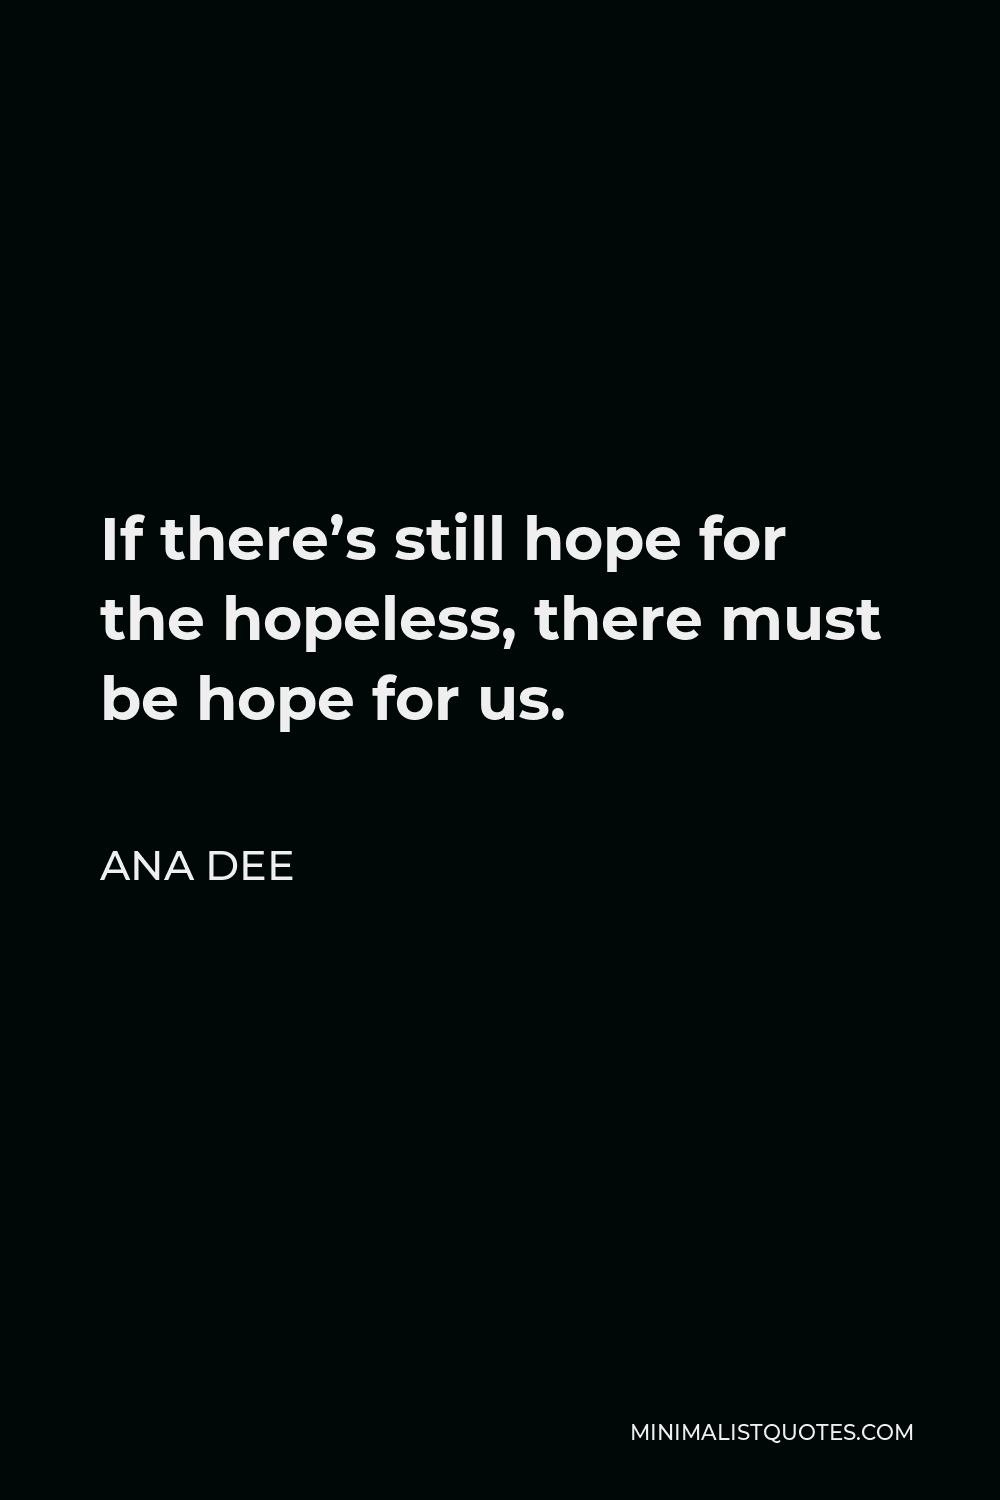 Ana Dee Quote - If there’s still hope for the hopeless, there must be hope for us.